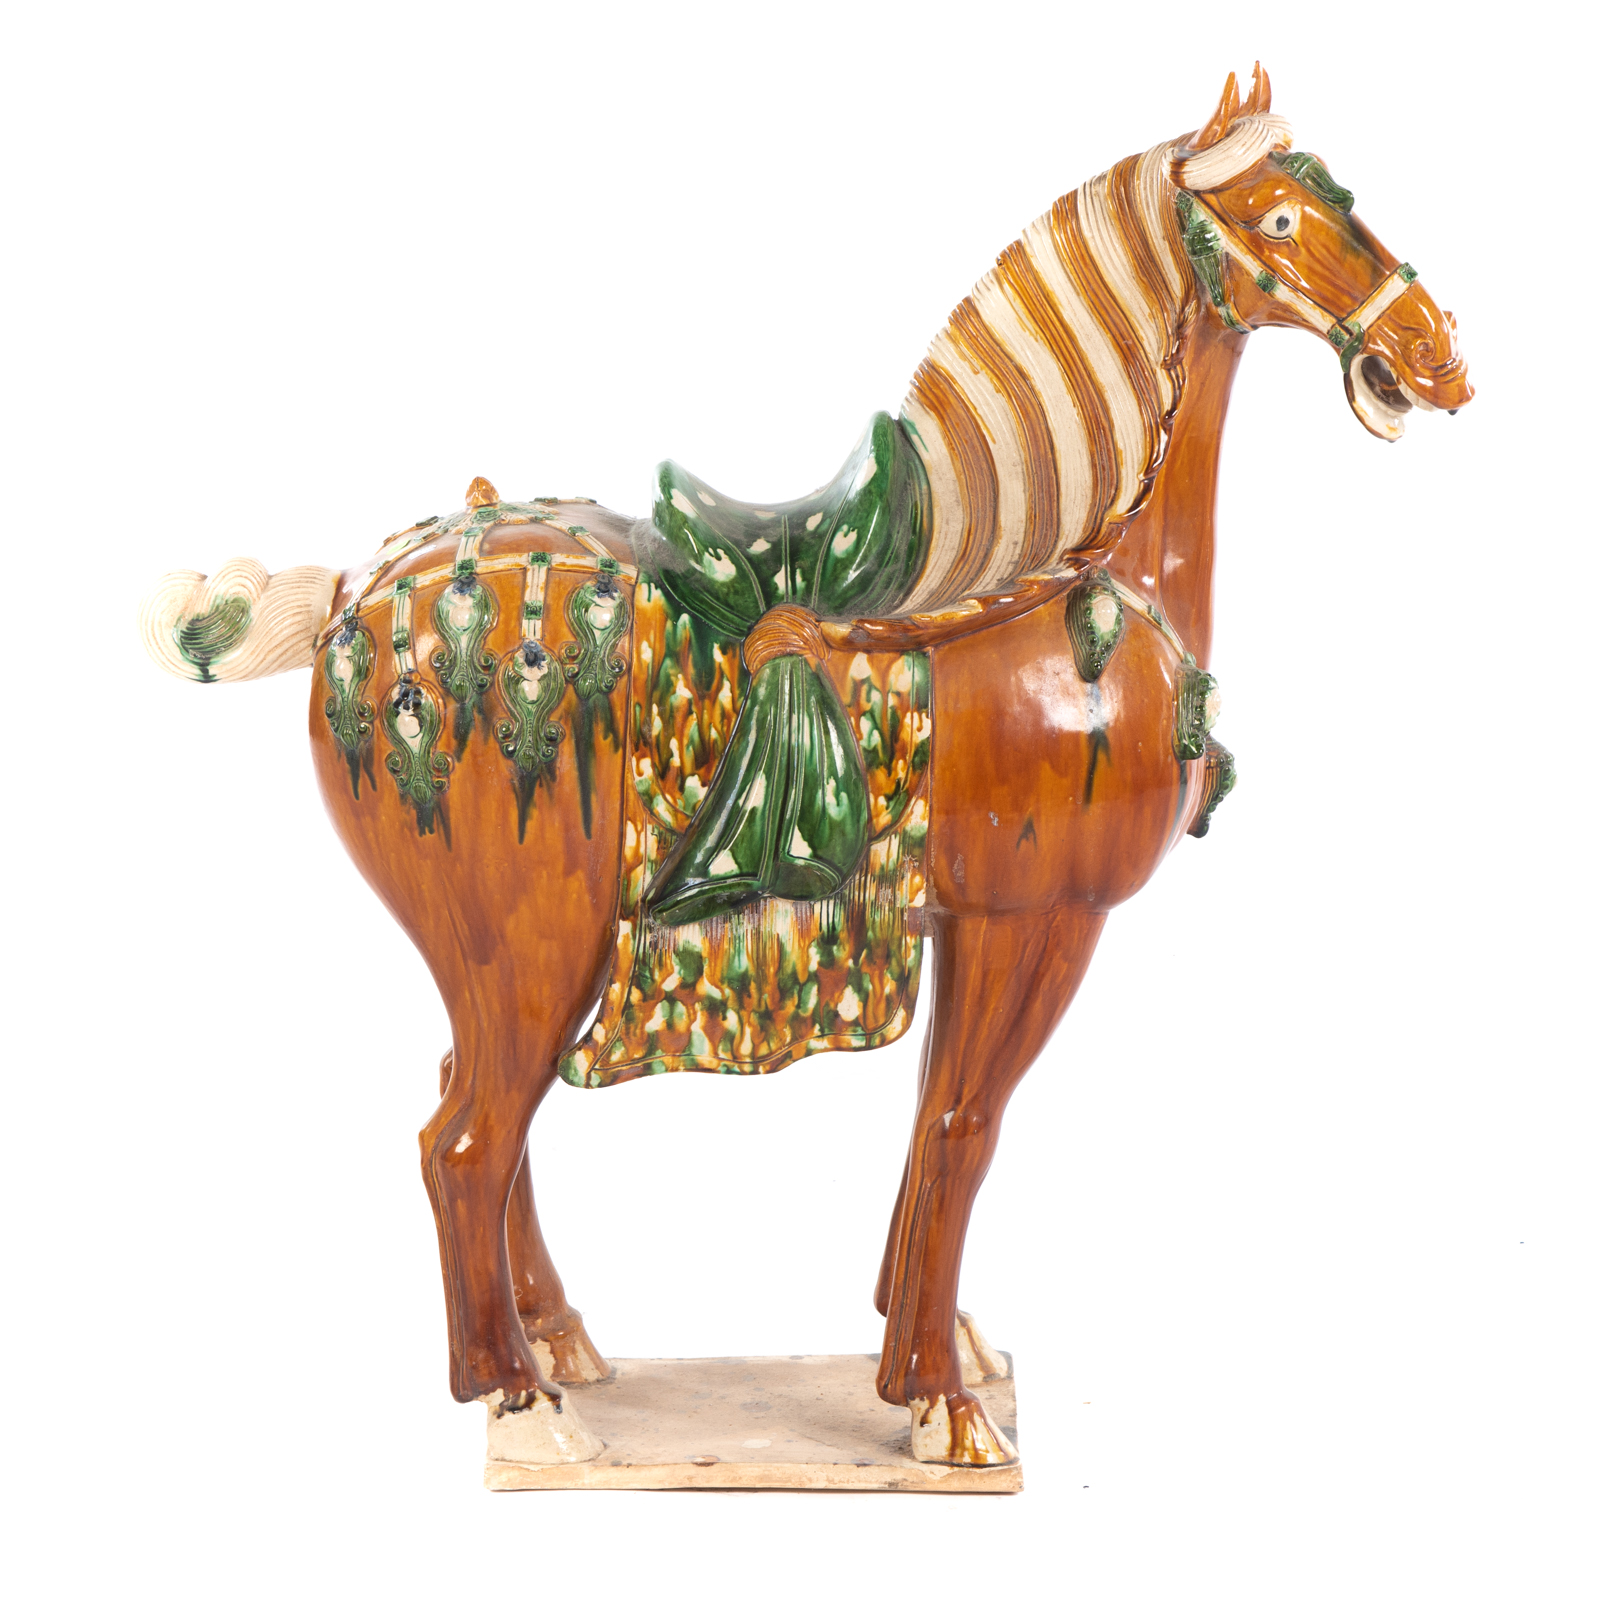 LARGE TANG STYLE TERRACOTTA HORSE 287583